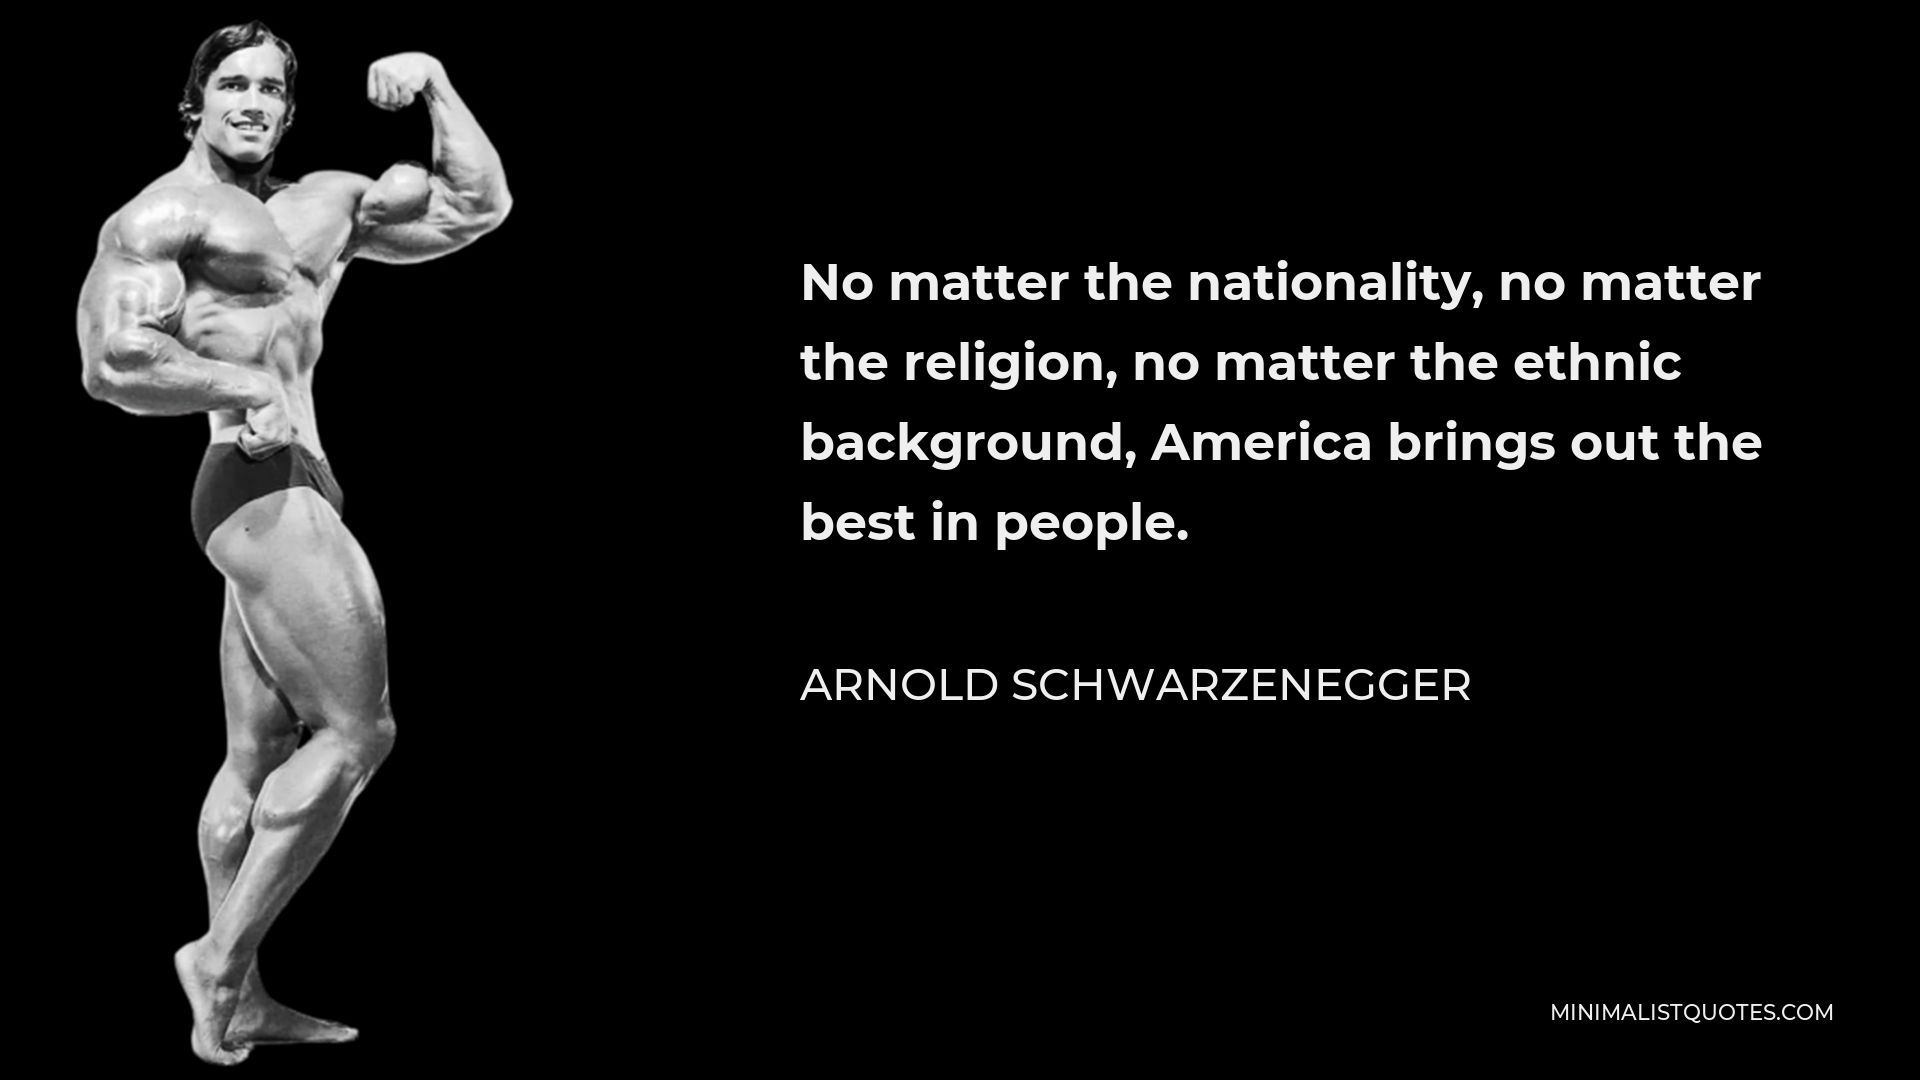 Arnold Schwarzenegger Quote - No matter the nationality, no matter the religion, no matter the ethnic background, America brings out the best in people.